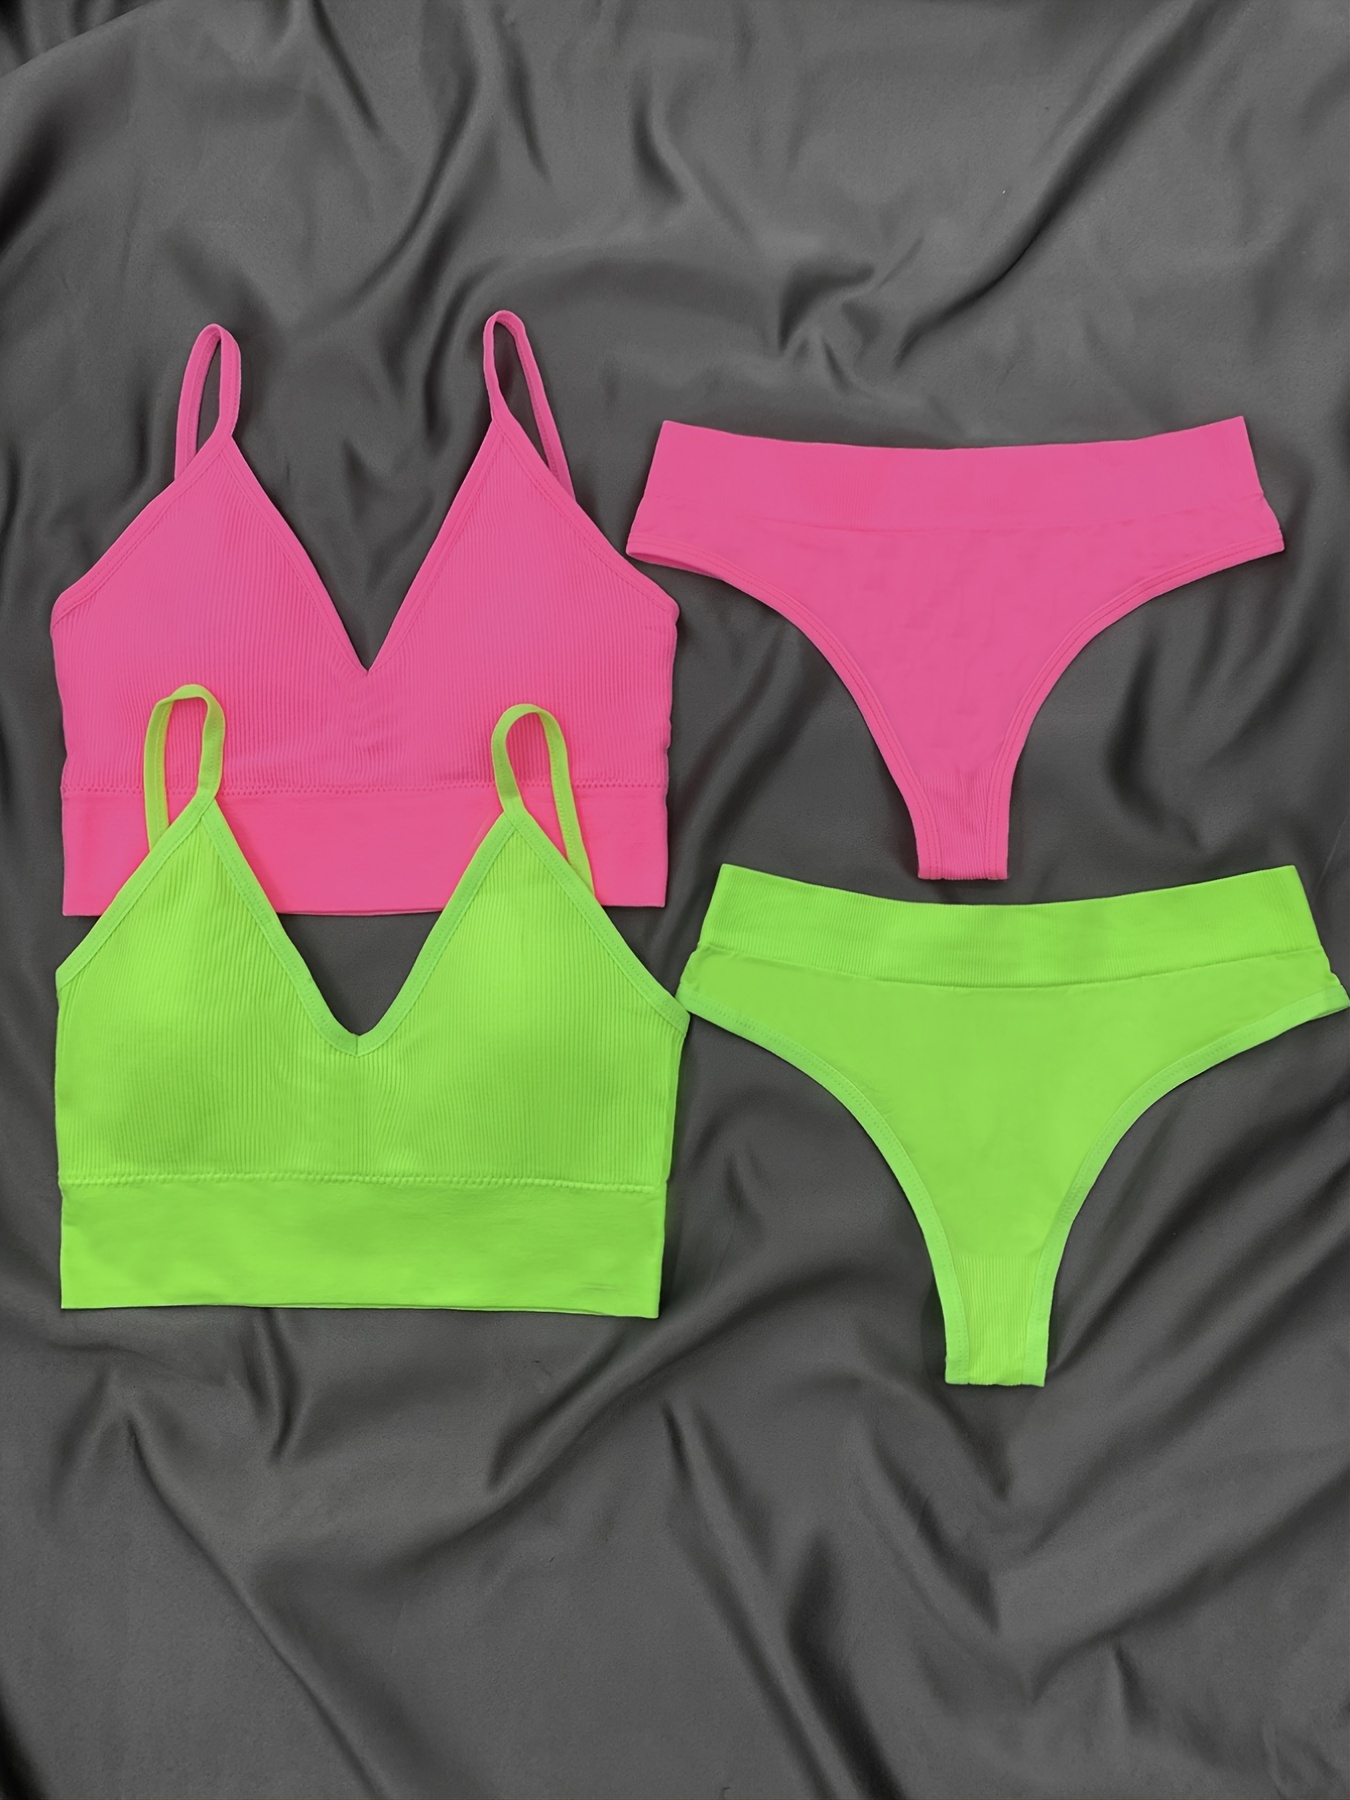 Plain Ribbed Lingerie Bra Top and Thong Set in Neon Green